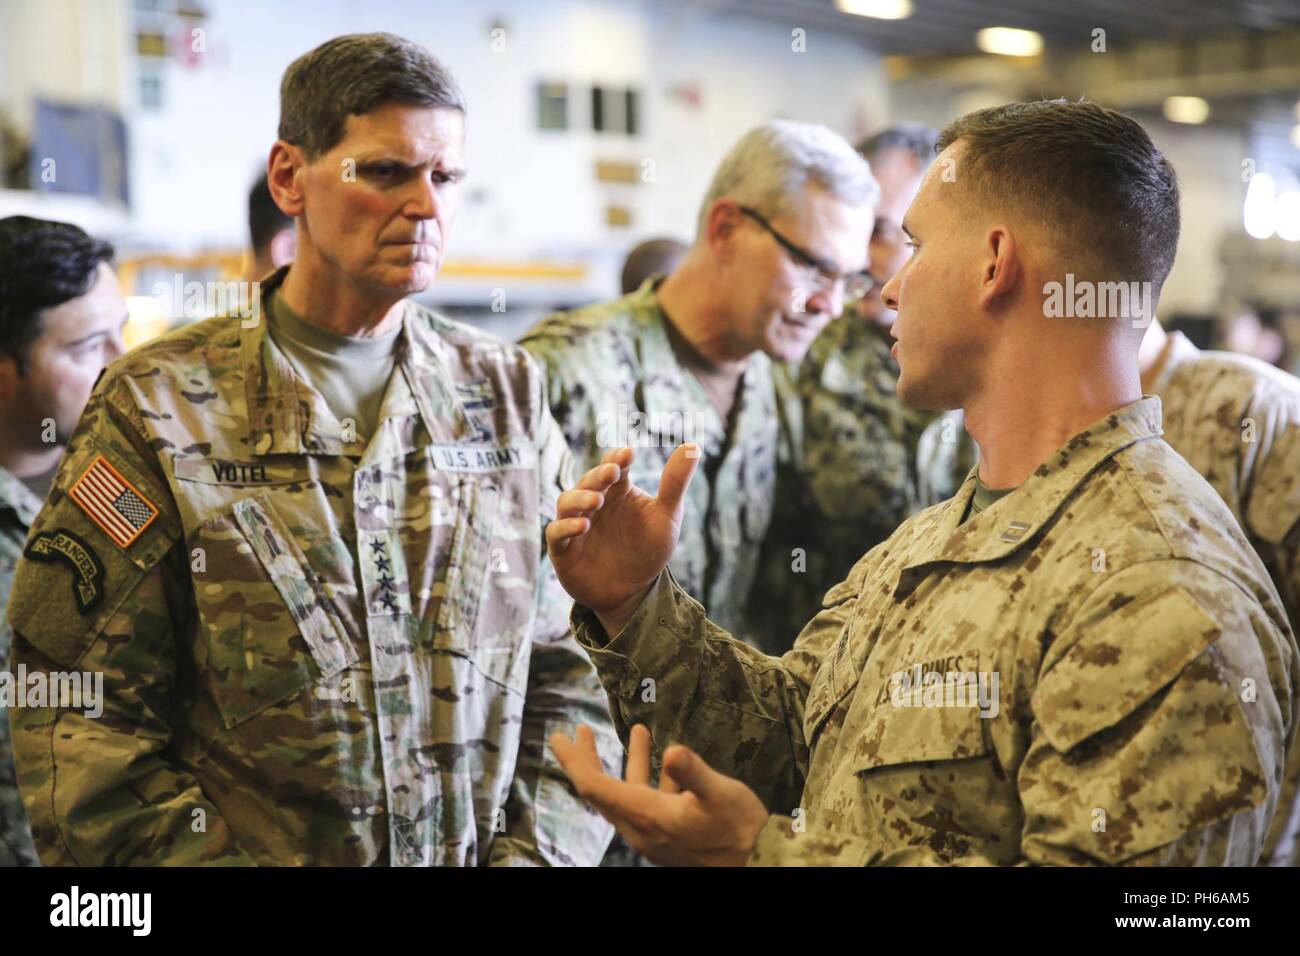 ARABIAN GULF (June 22, 2018) U.S. Army Gen. Joseph Votel, commander, U.S. Central Command,  speaks with U.S. Marine Corps Capt. Daniel Herm aboard the Wasp-class amphibious assault ship USS Iwo Jima (LHD 7), June 22, 2018. Votel, Vice Adm. Scott Stearney, commander, U.S. Naval Forces Central Command, and other distinguished visitors took a tour of Iwo Jima and spoke with crew members and Marines with the 26th Marine Expeditionary Unit, who are currently deployed to the U.S. 5th Fleet of operations in support of maritime security operations to reassure allies and partners and preserve the freed Stock Photo